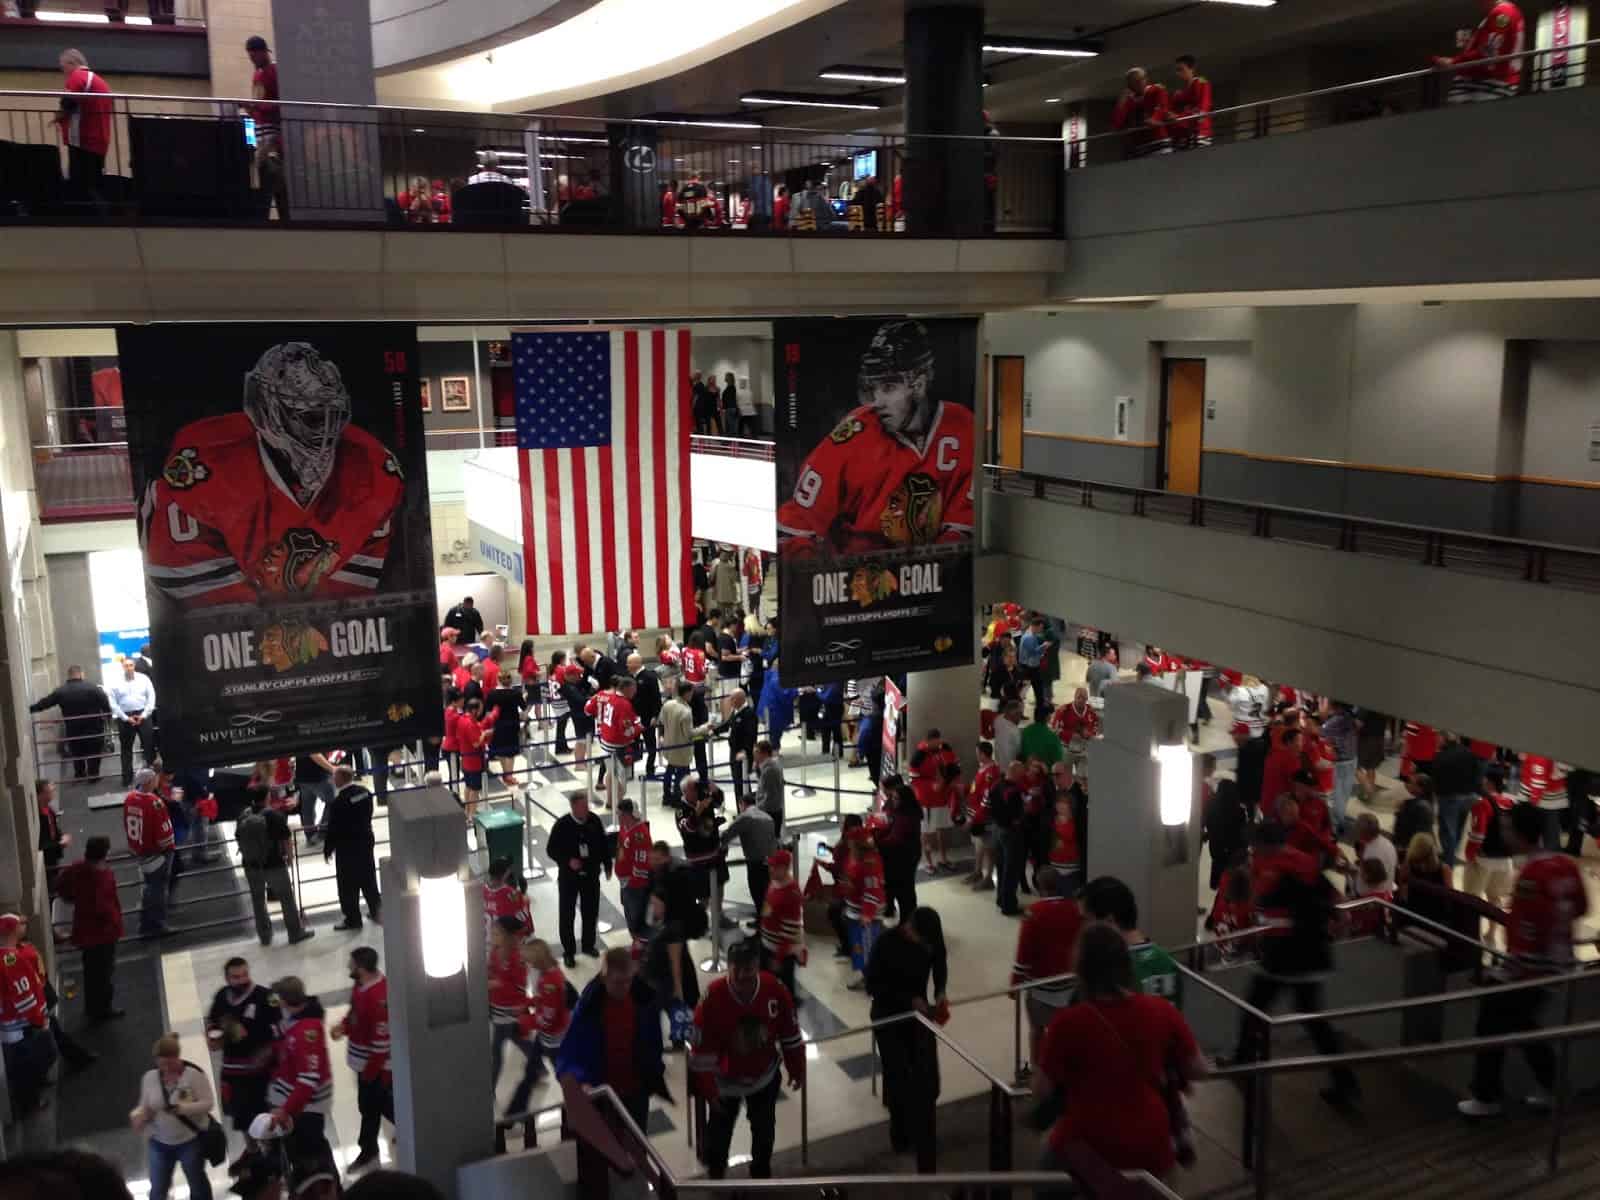 Game 6 of the 2015 Stanley Cup Finals at the United Center in Chicago